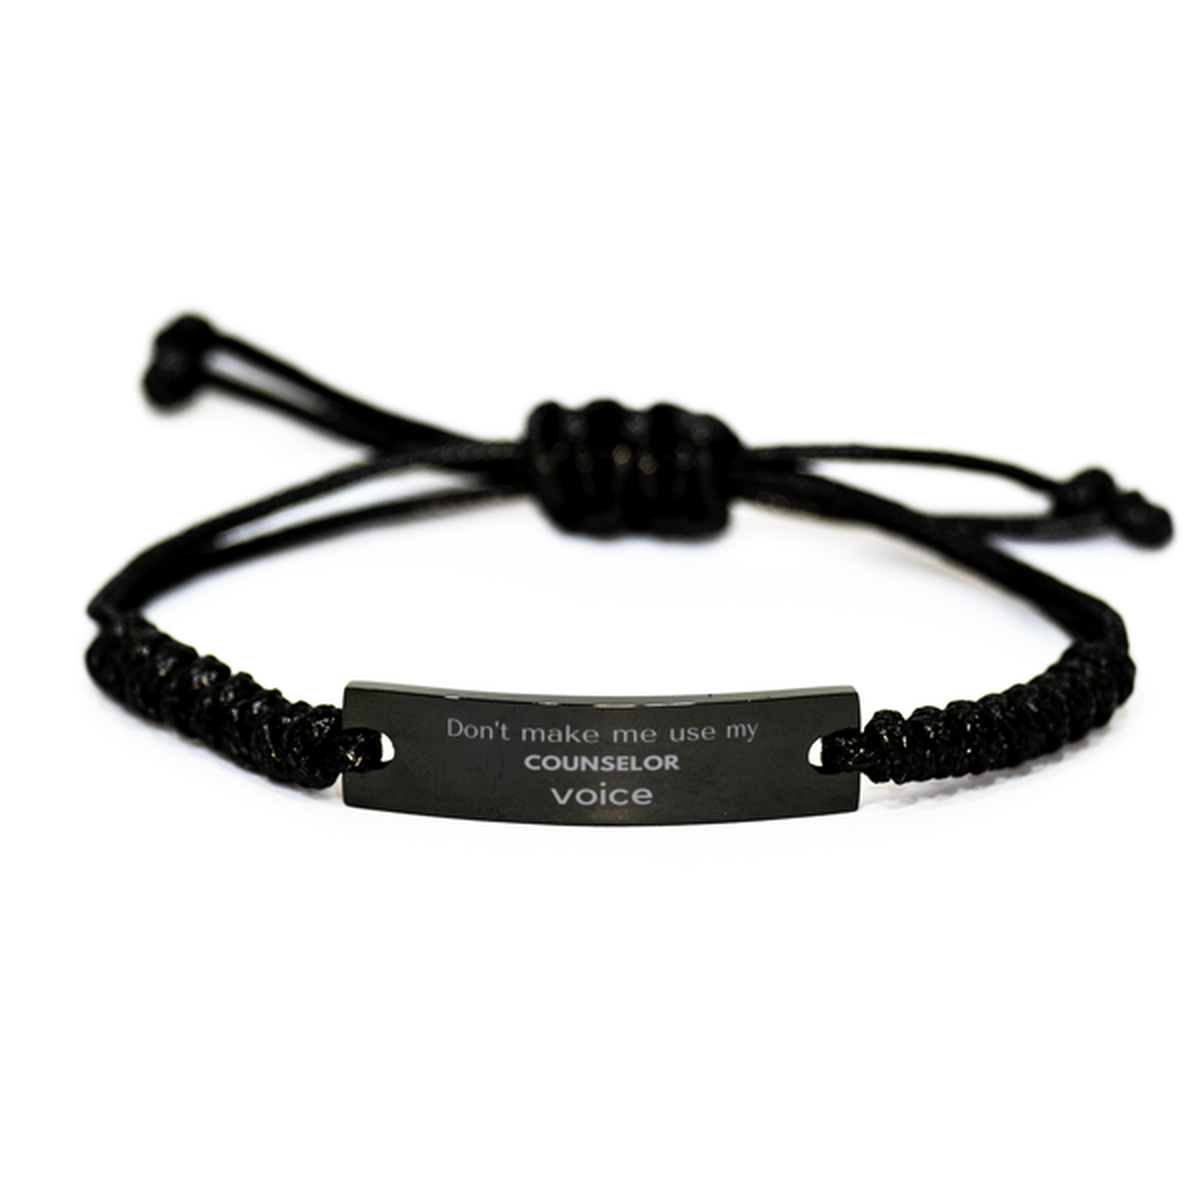 Don't make me use my Counselor voice, Sarcasm Counselor Gifts, Christmas Counselor Black Rope Bracelet Birthday Unique Gifts For Counselor Coworkers, Men, Women, Colleague, Friends